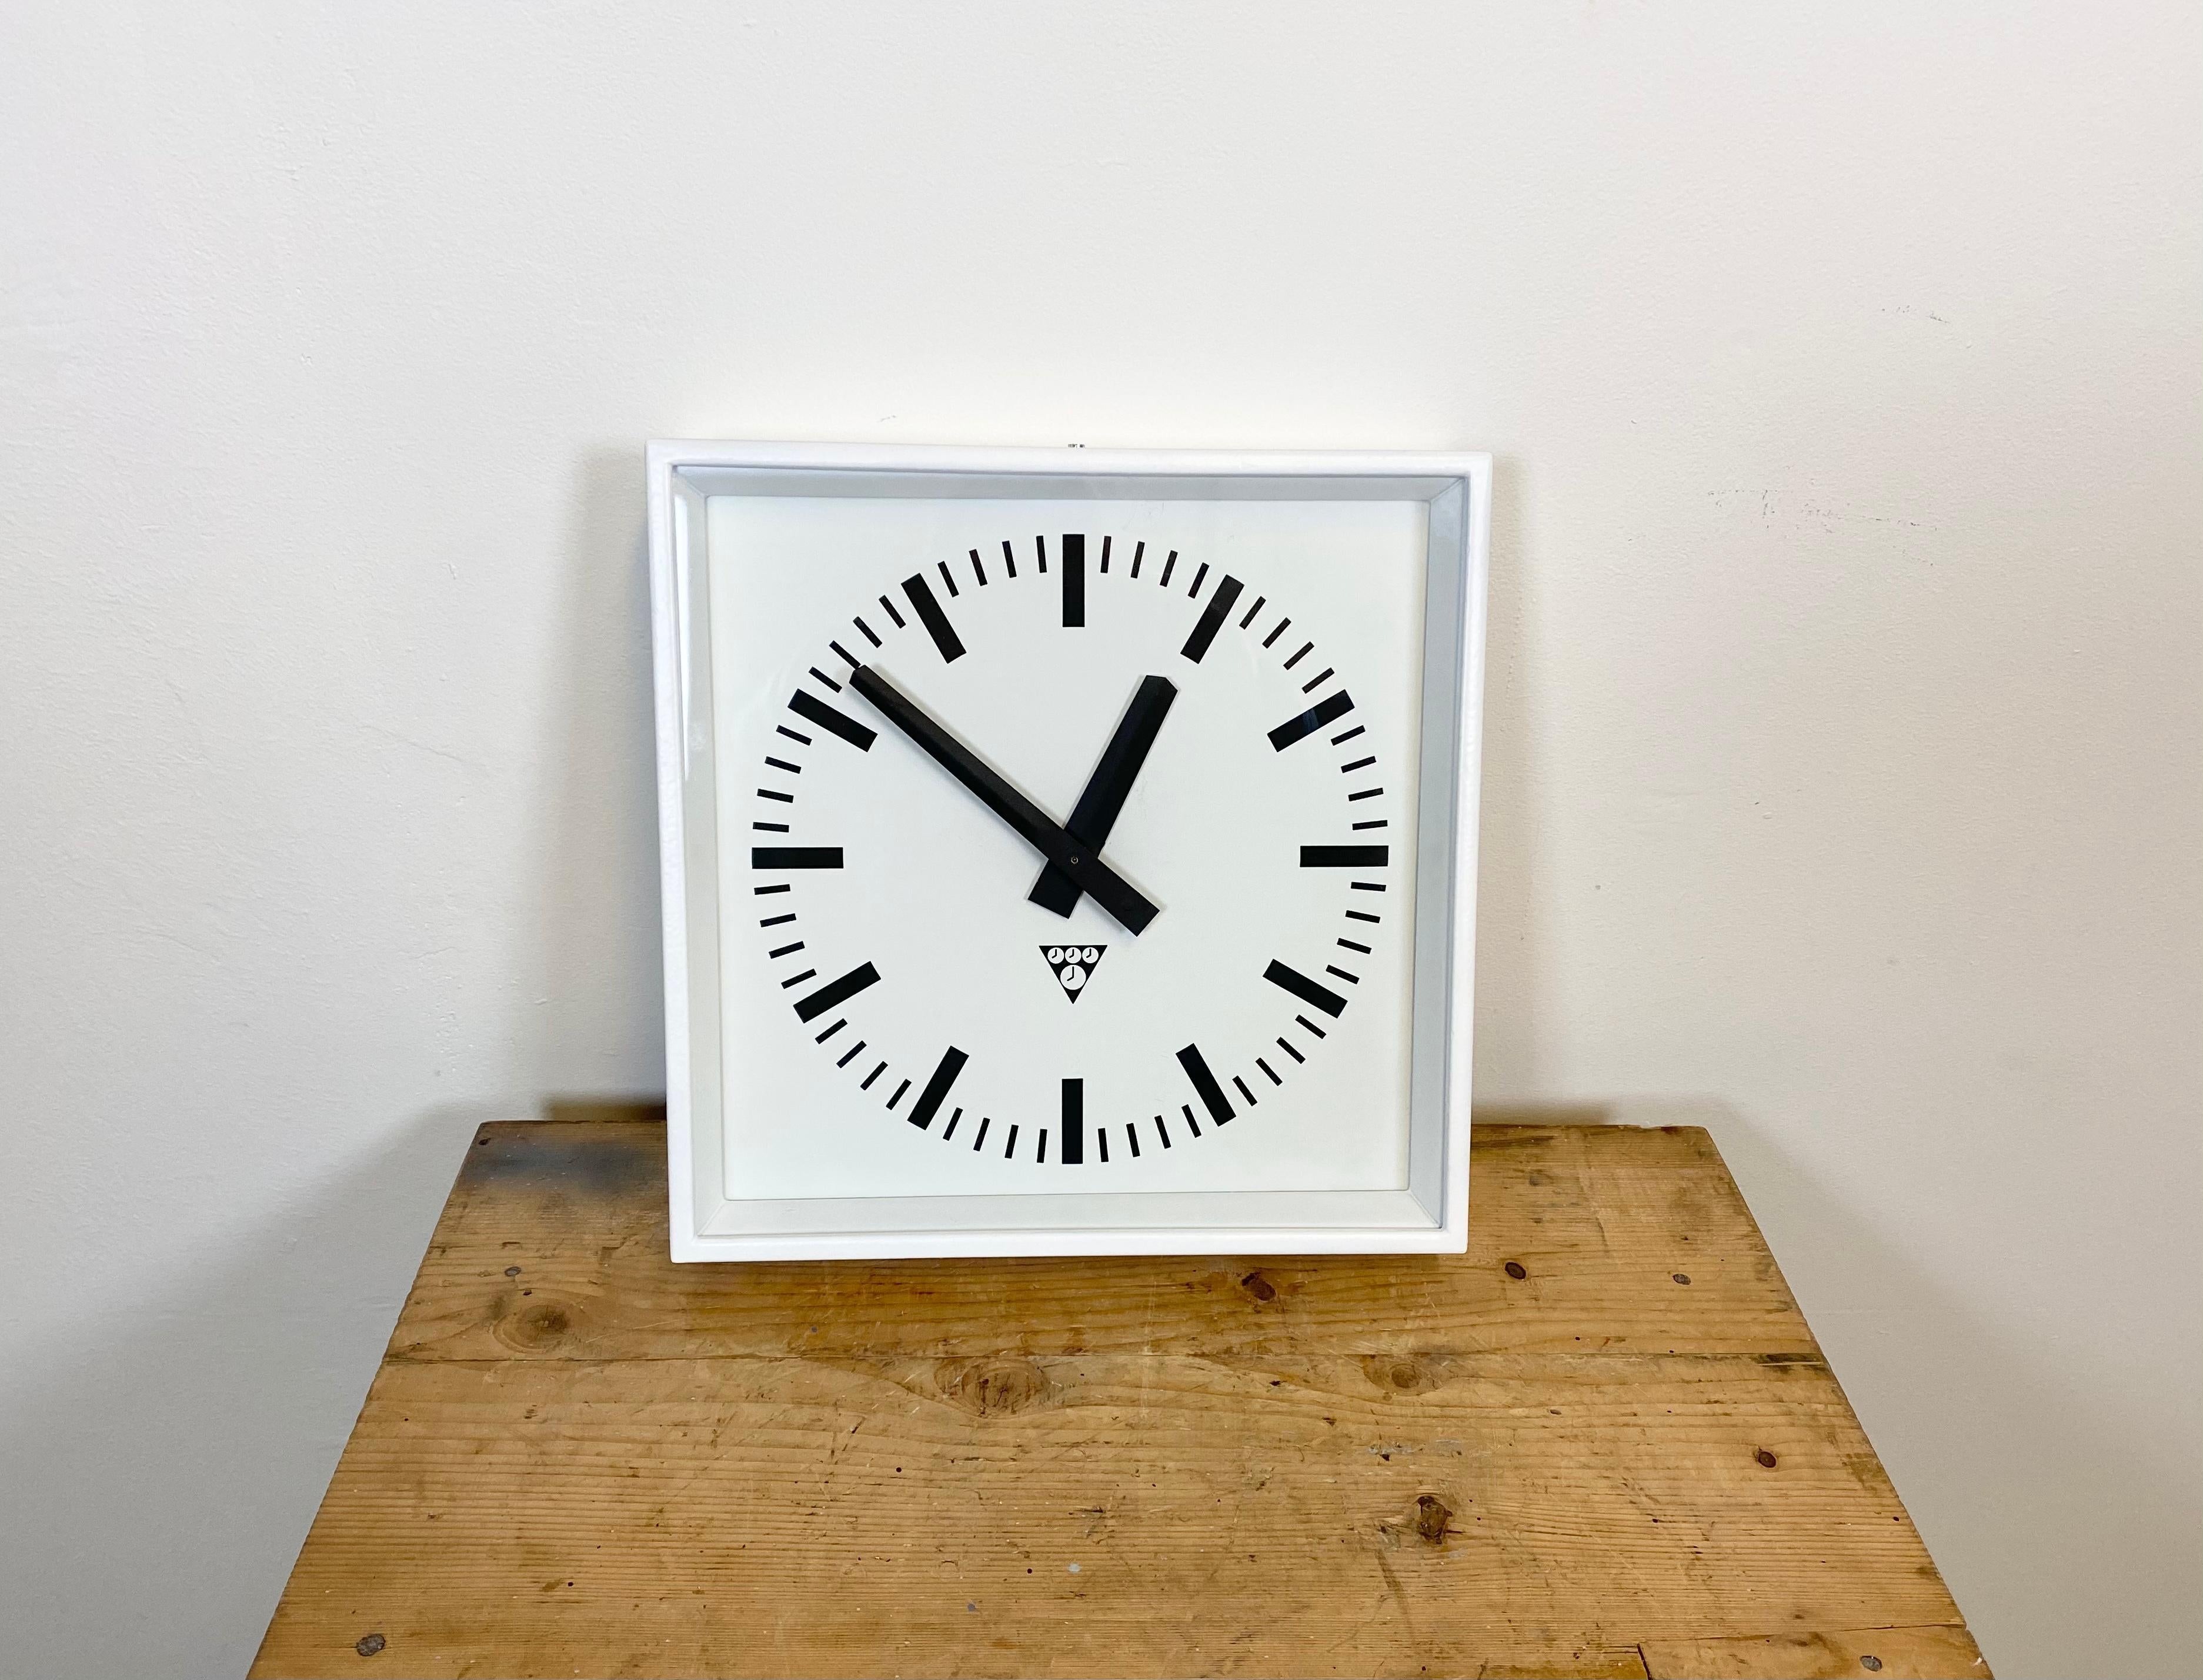 - Clock made by Pragotron in former Czechoslovakia during the 1970s 
- Was used in factories, schools and railway stations 
- White metal body 
- Aluminium dial and hands 
- Clear glass cover 
- This item has been converted into a